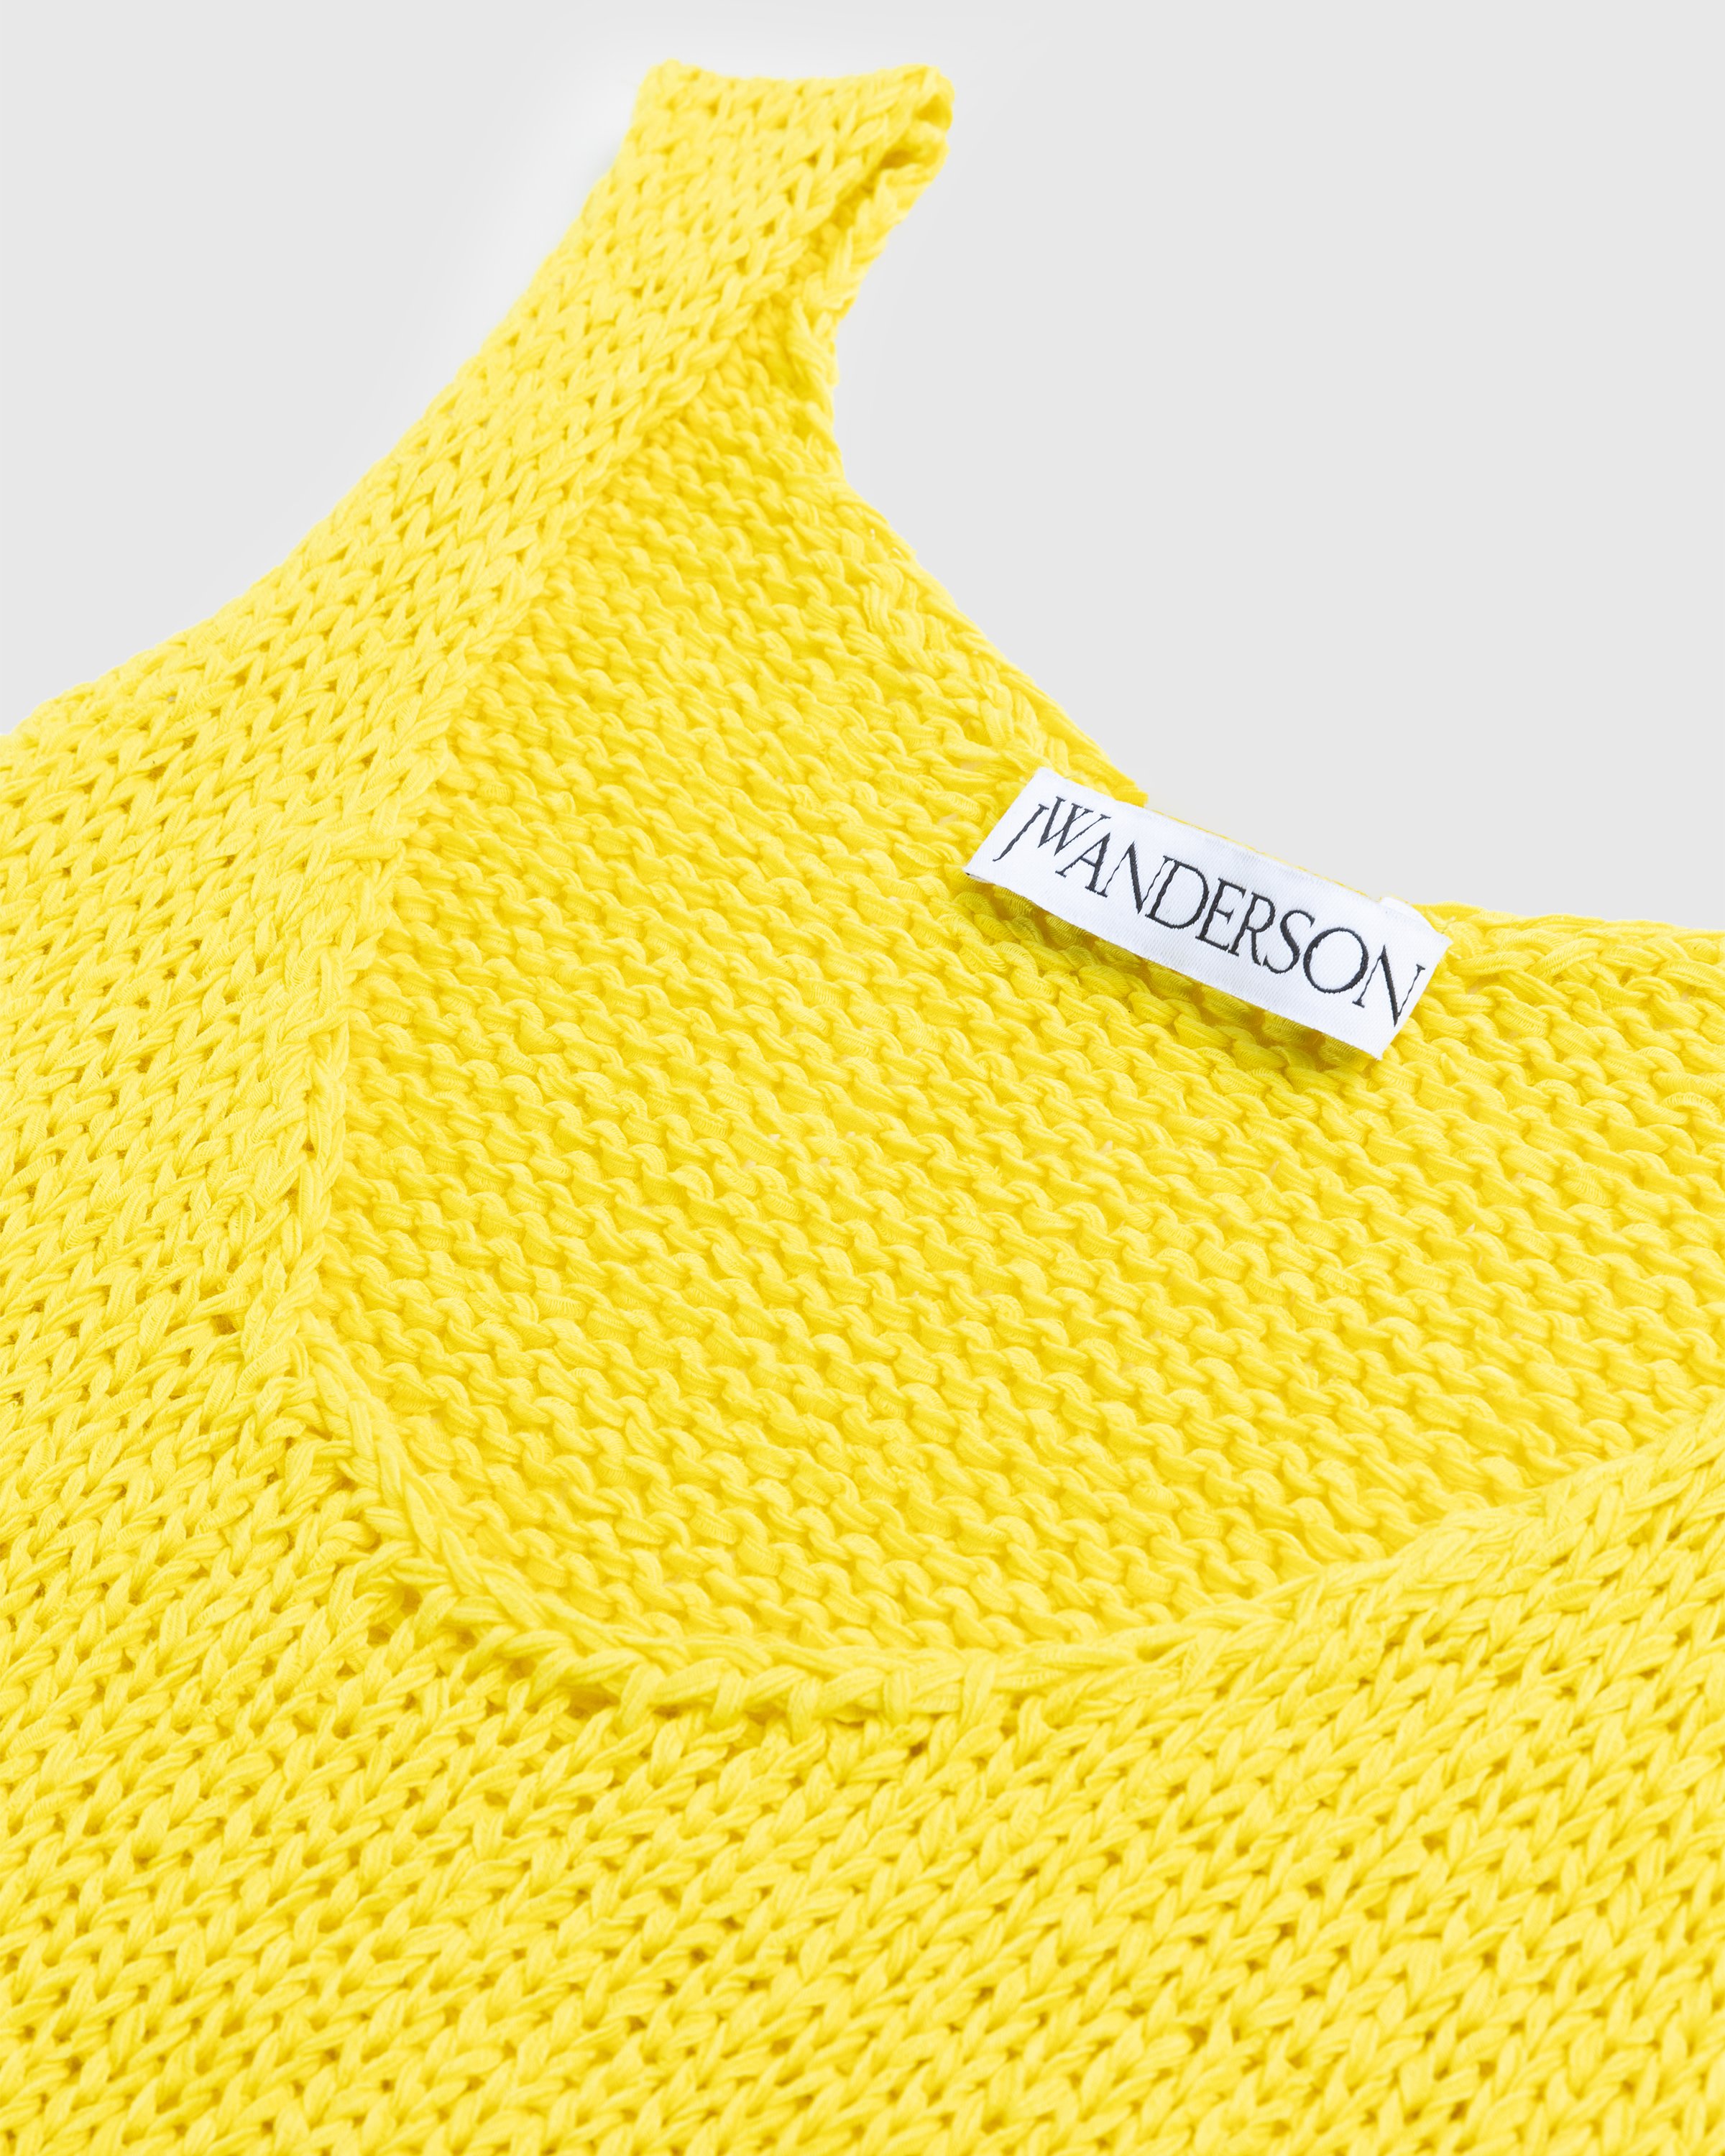 J.W. Anderson - Apple Tank Top Yellow - Clothing - Yellow - Image 6